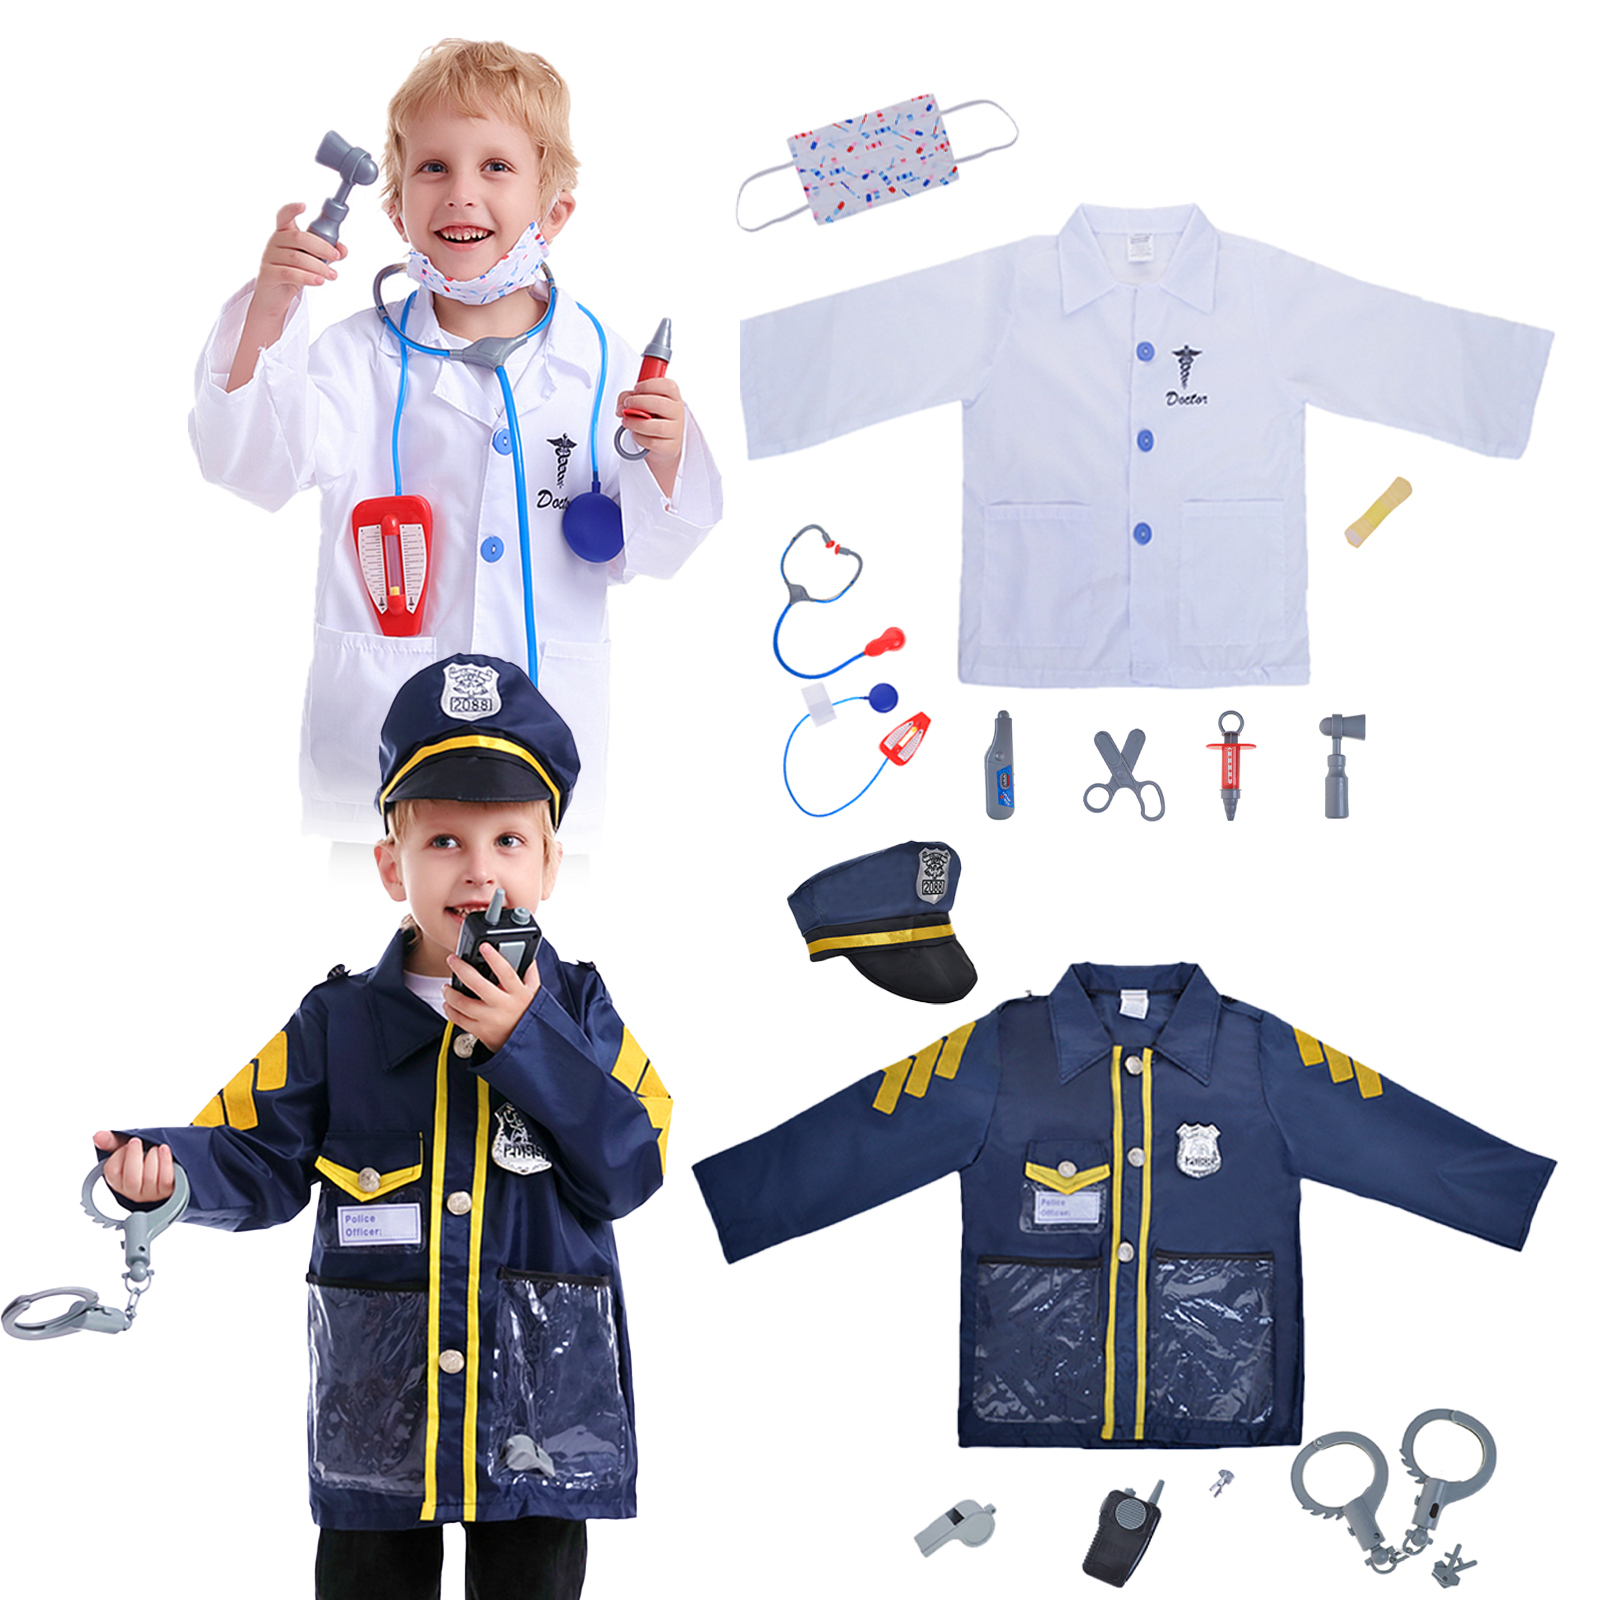 Children's police clothing, police role play with handcuffs and whistles 